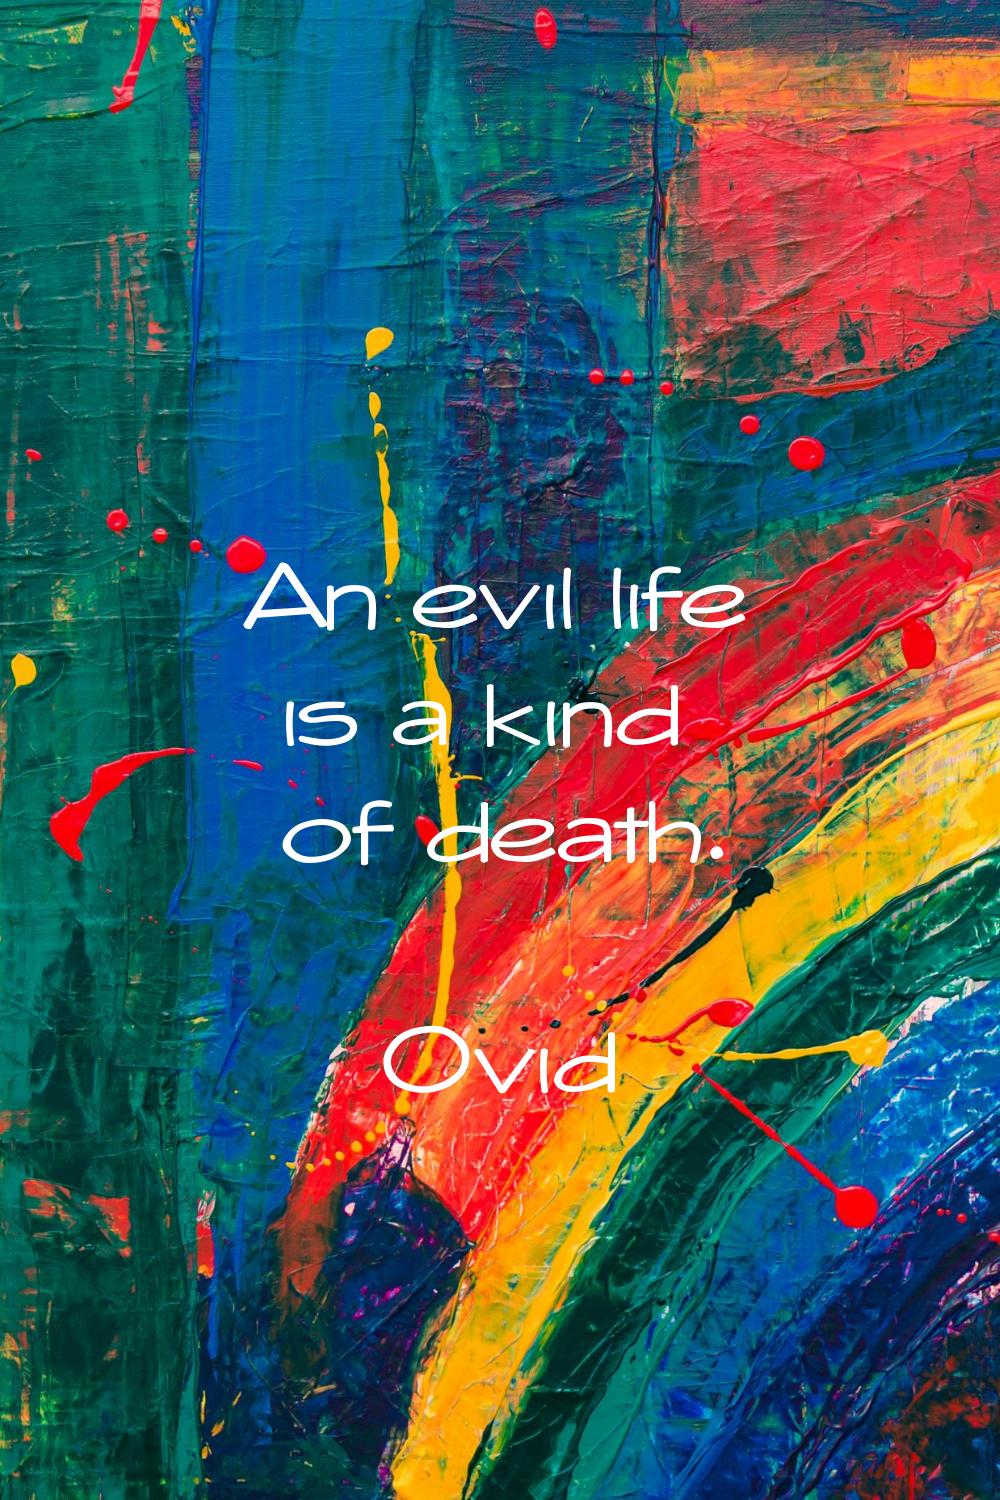 An evil life is a kind of death.